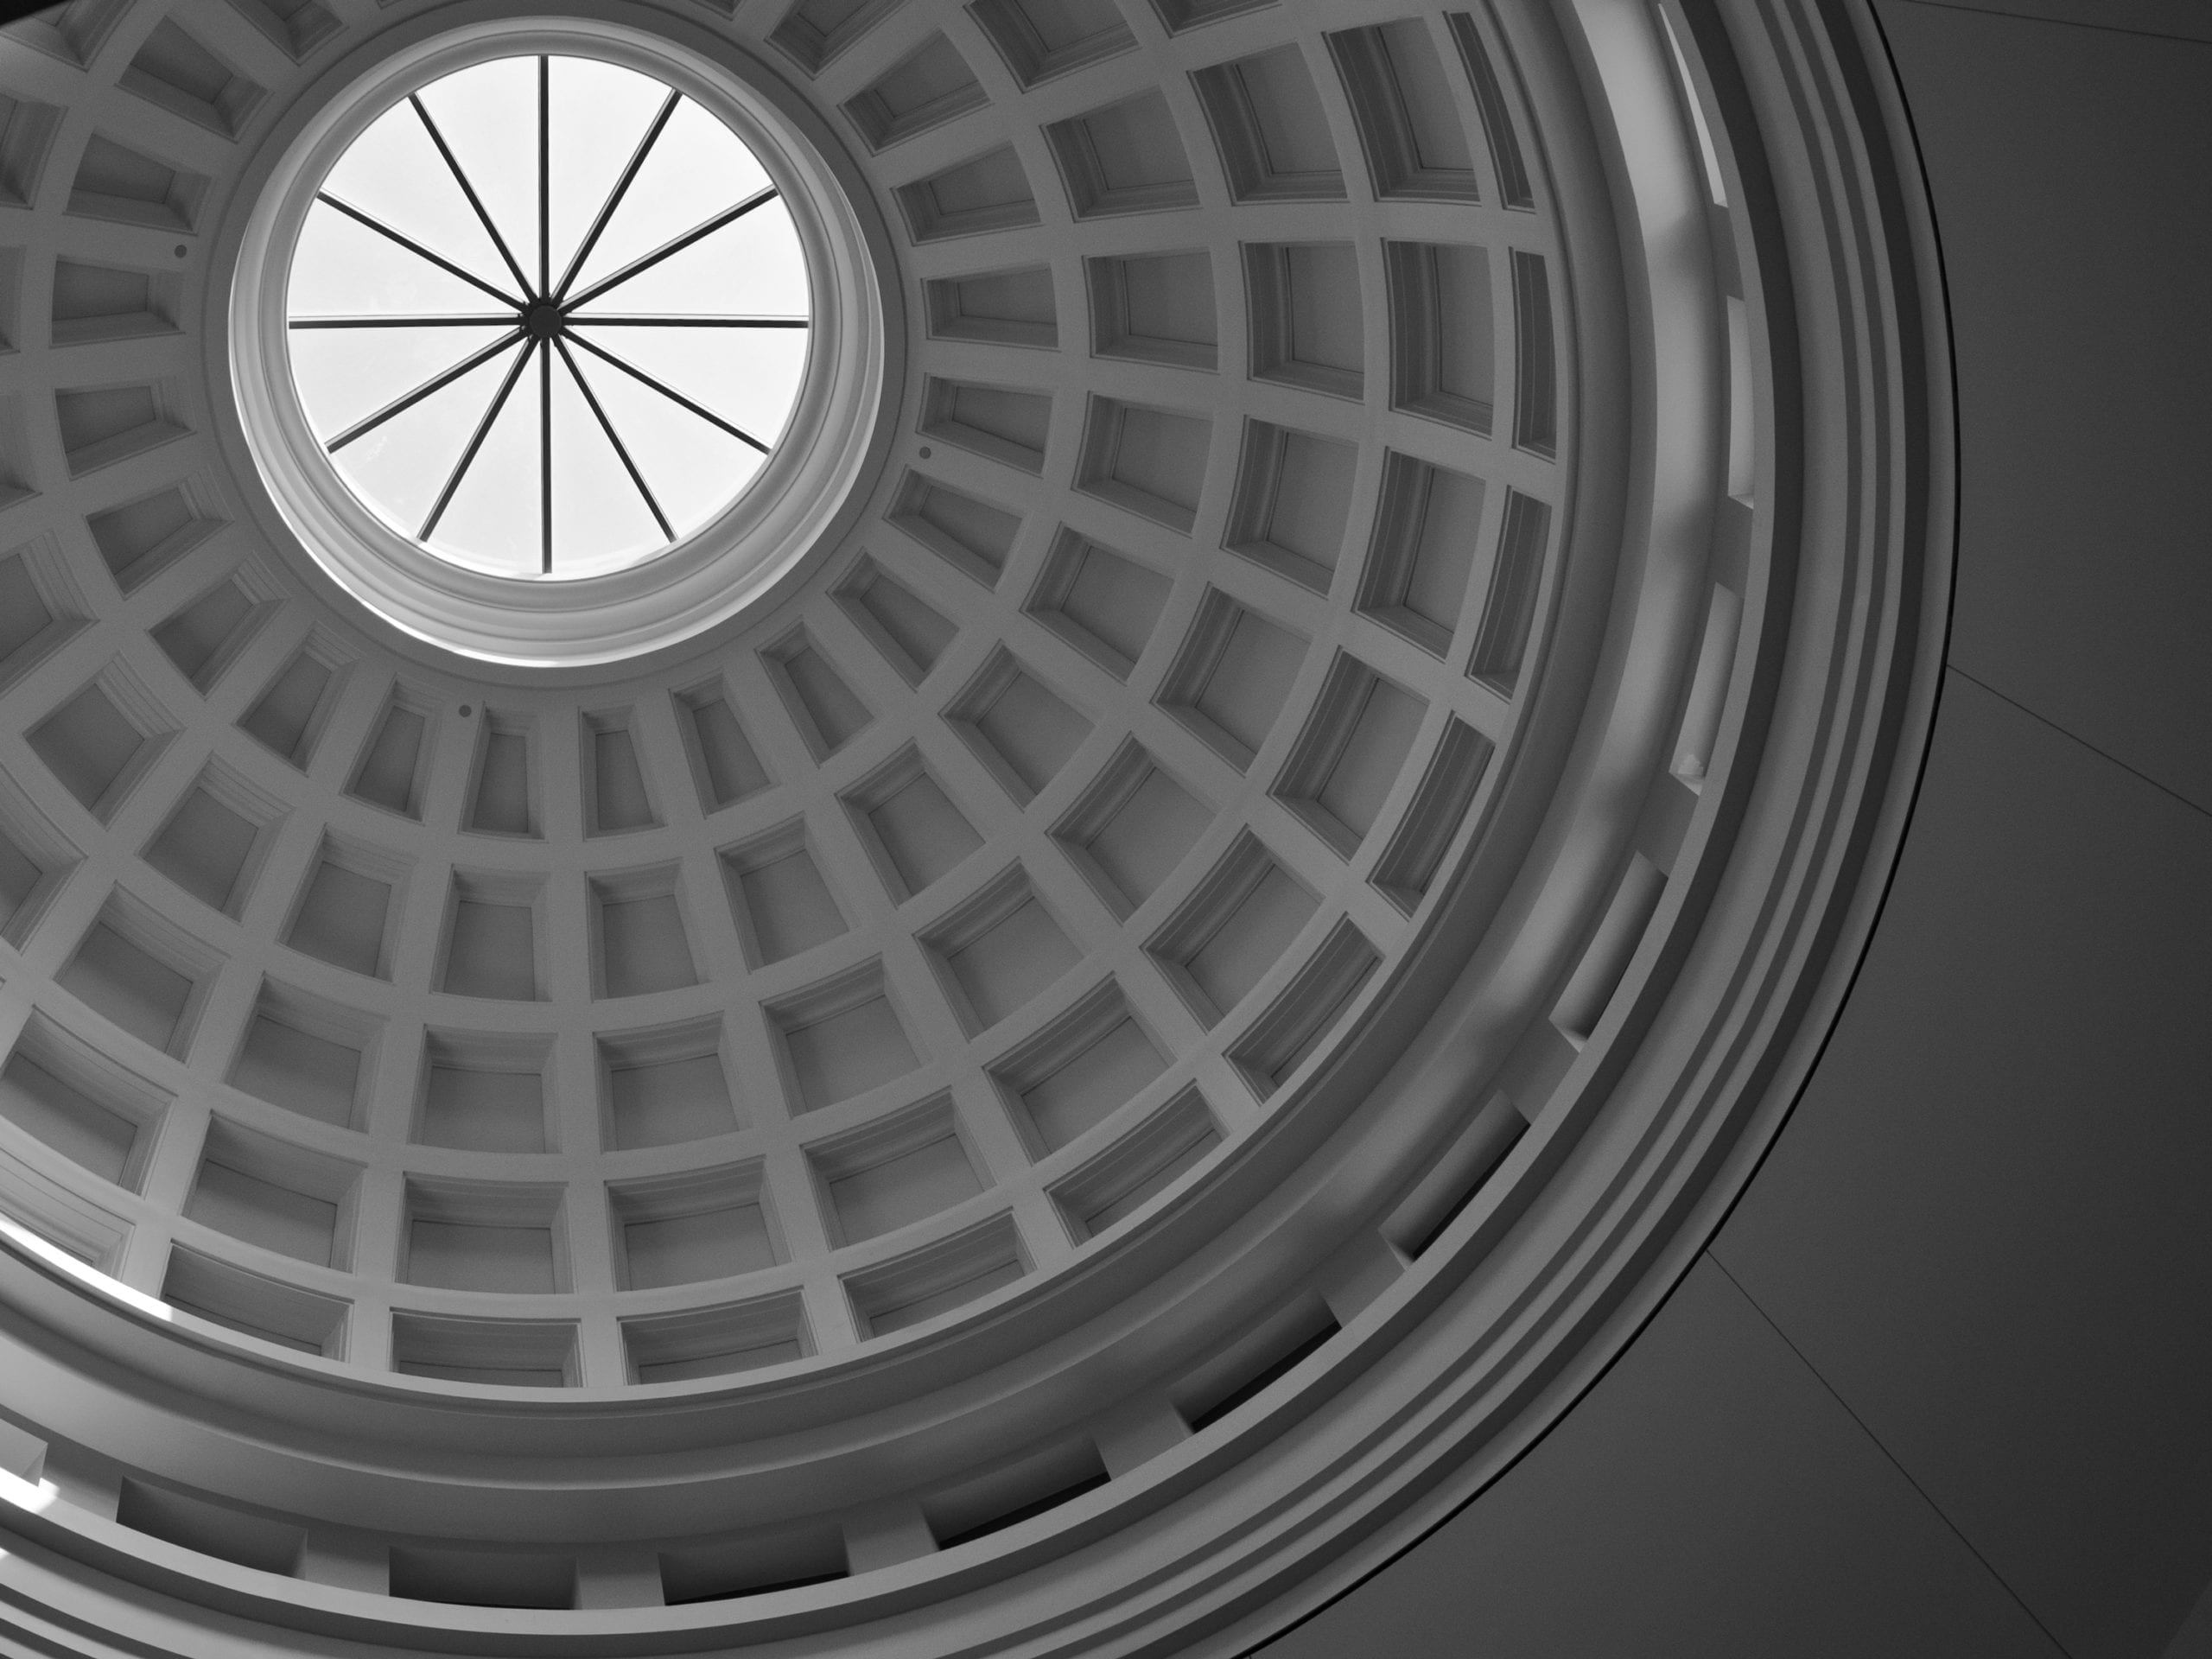 The interior dome of a courthouse. Photo by Flickr user Phil Roeder. RDM has experienced litigators and trial attorneys.